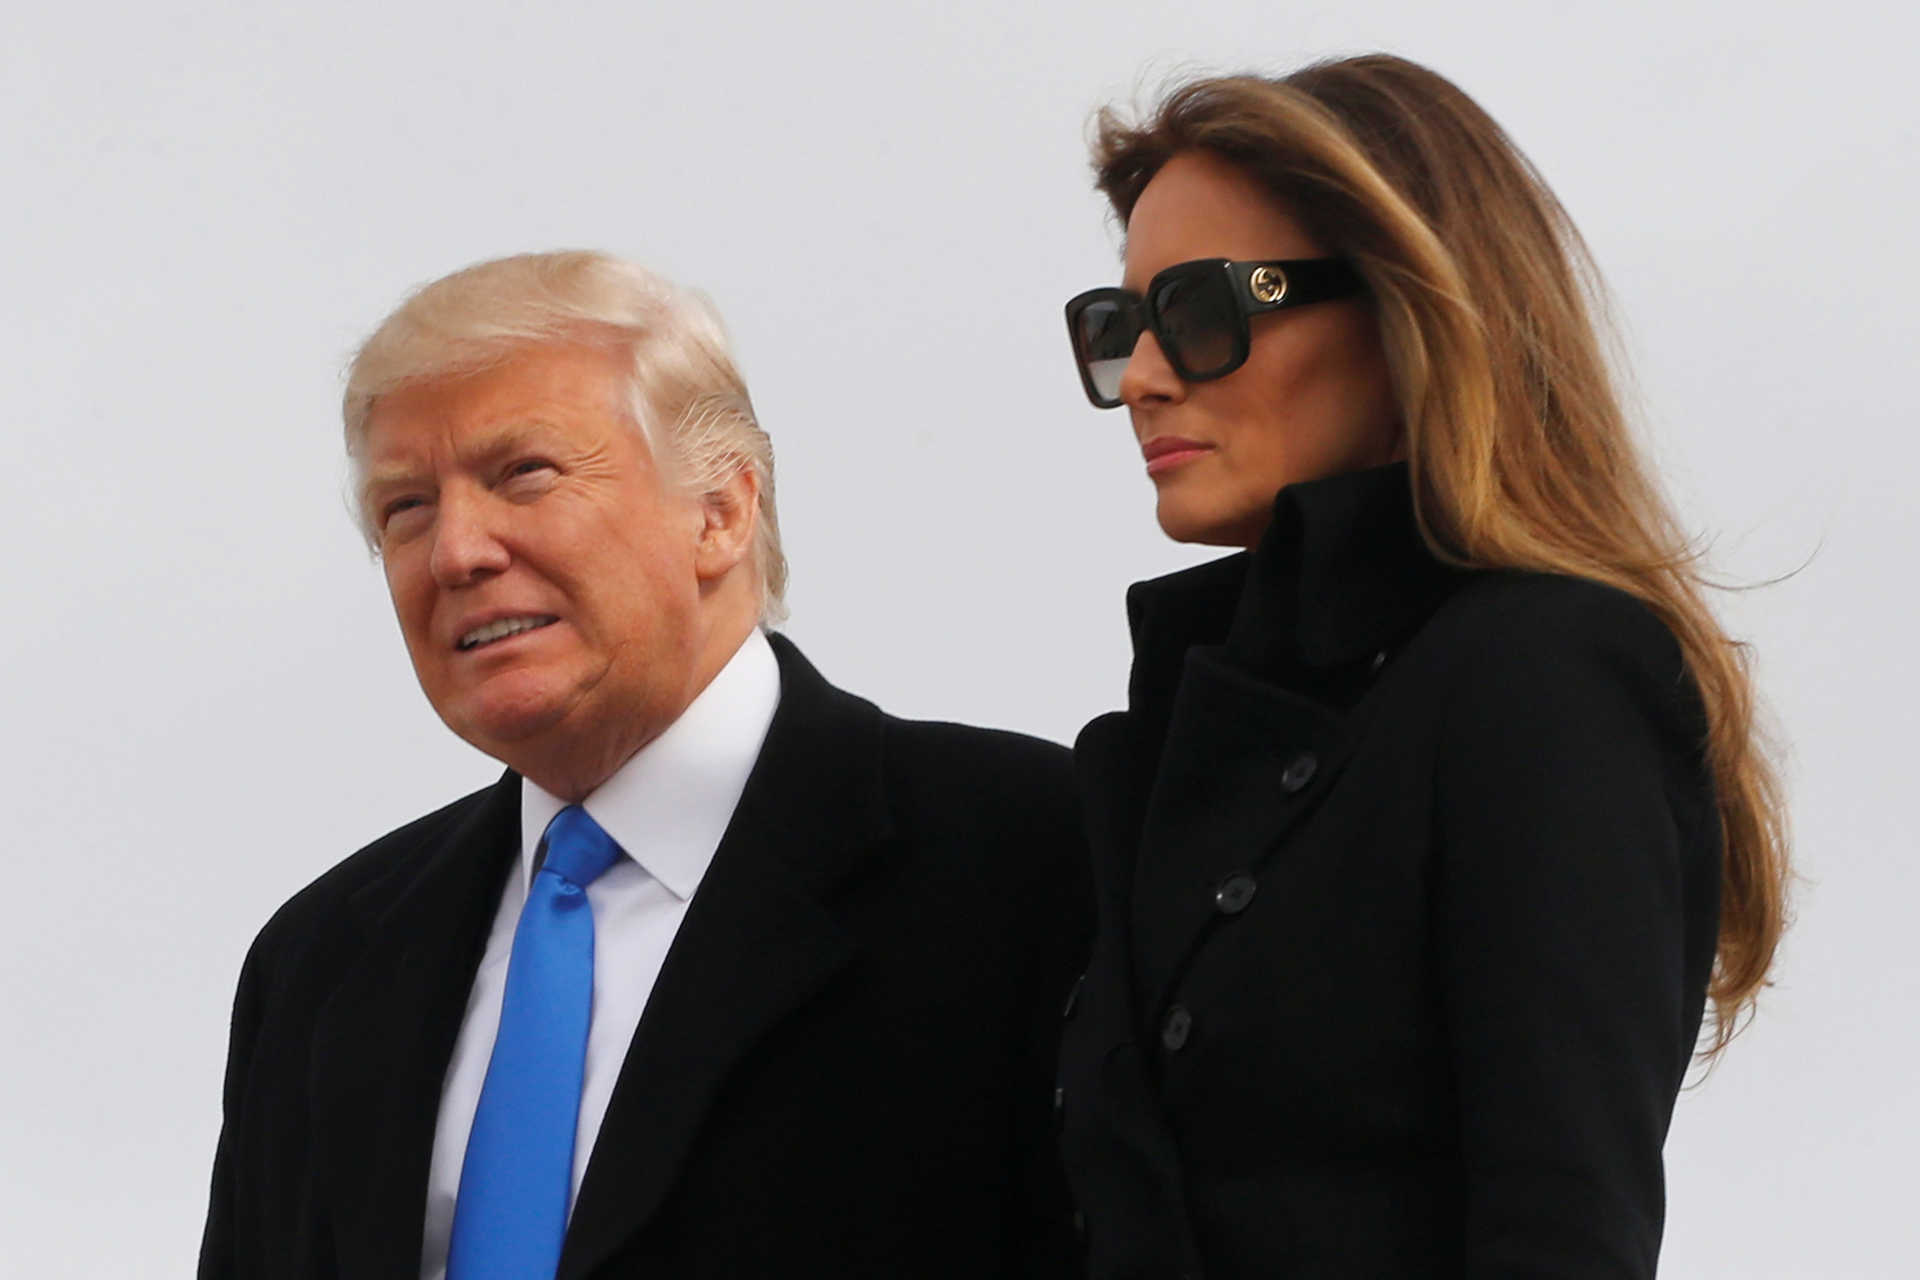 Trump and his wife arrive aboard a U.S. Air Force jet at Joint Base Andrews, Maryland